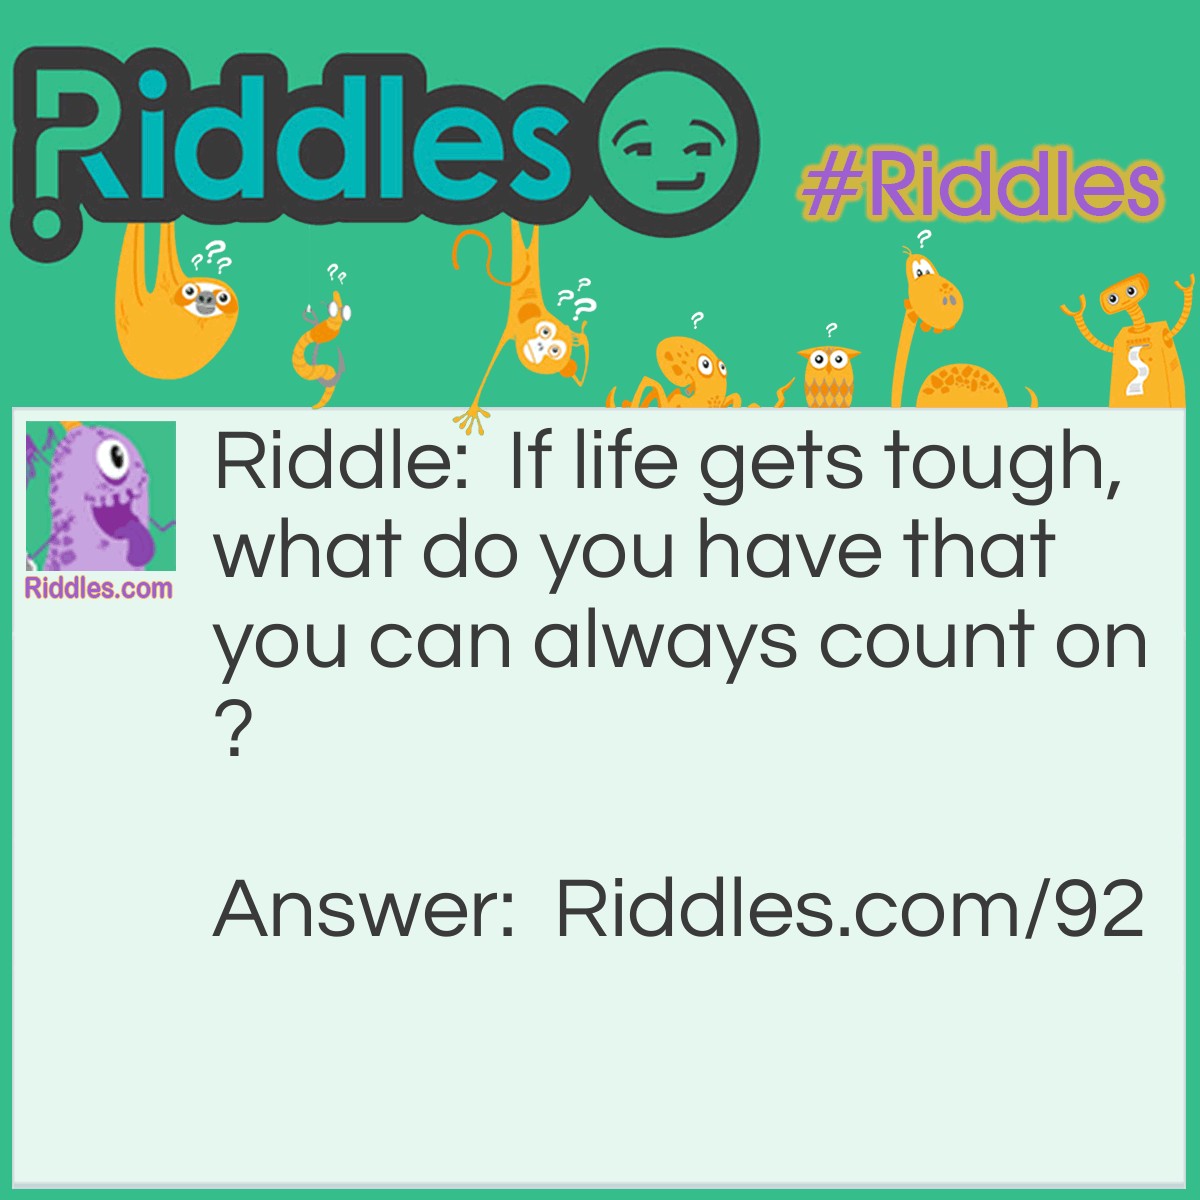 Riddle: If life gets tough, what do you have that you can always count on? Answer: Your fingers!